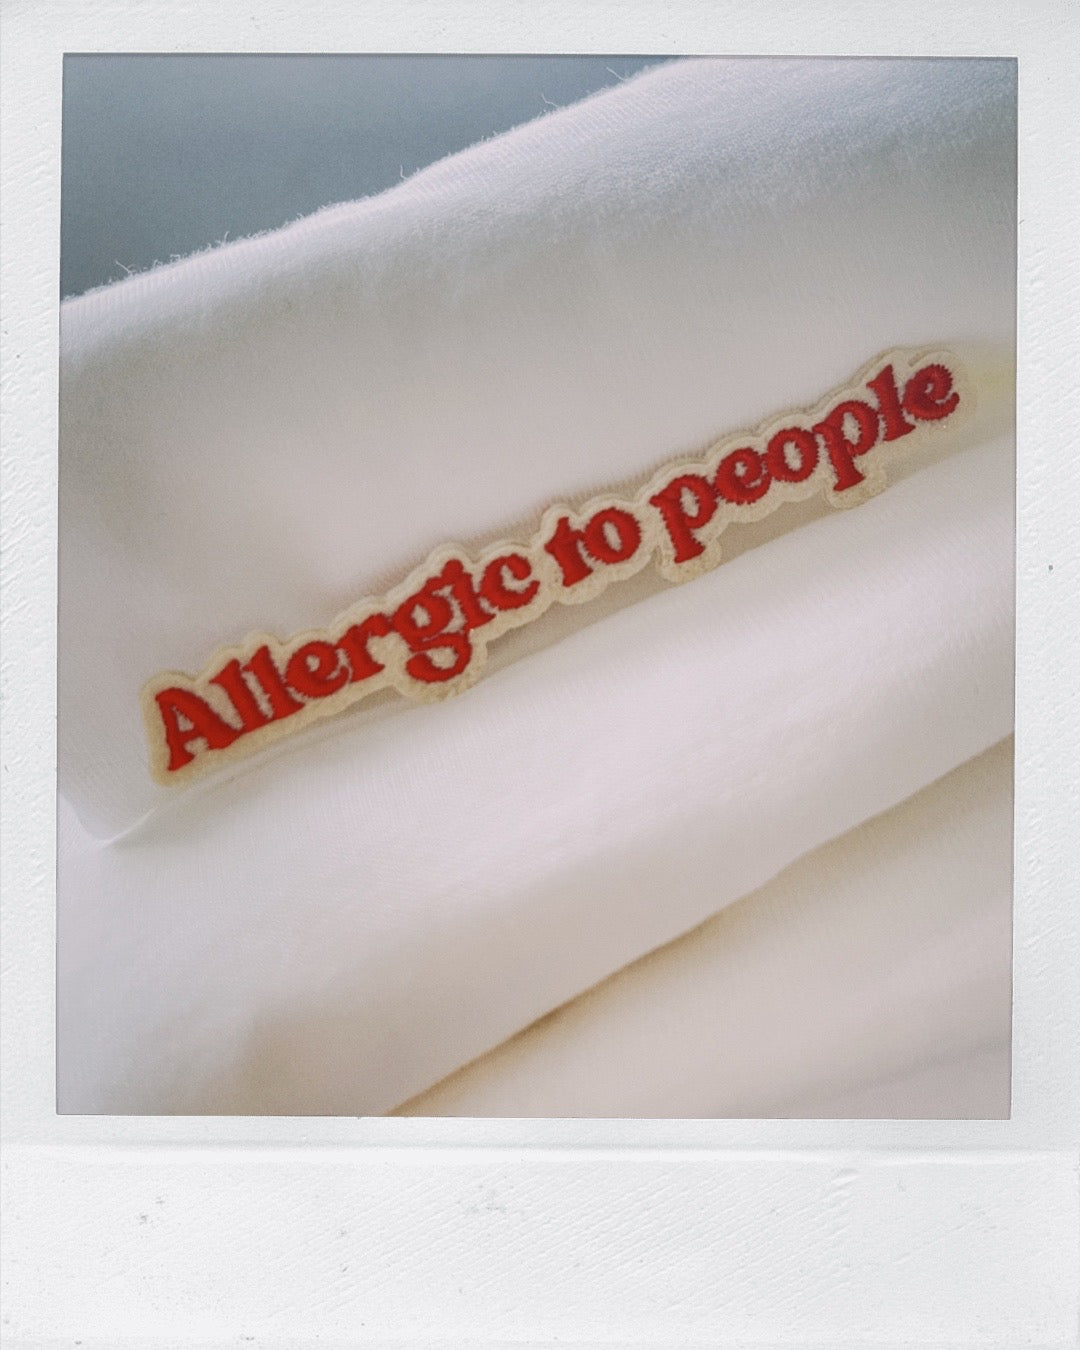 Allergic to people - tiny patch